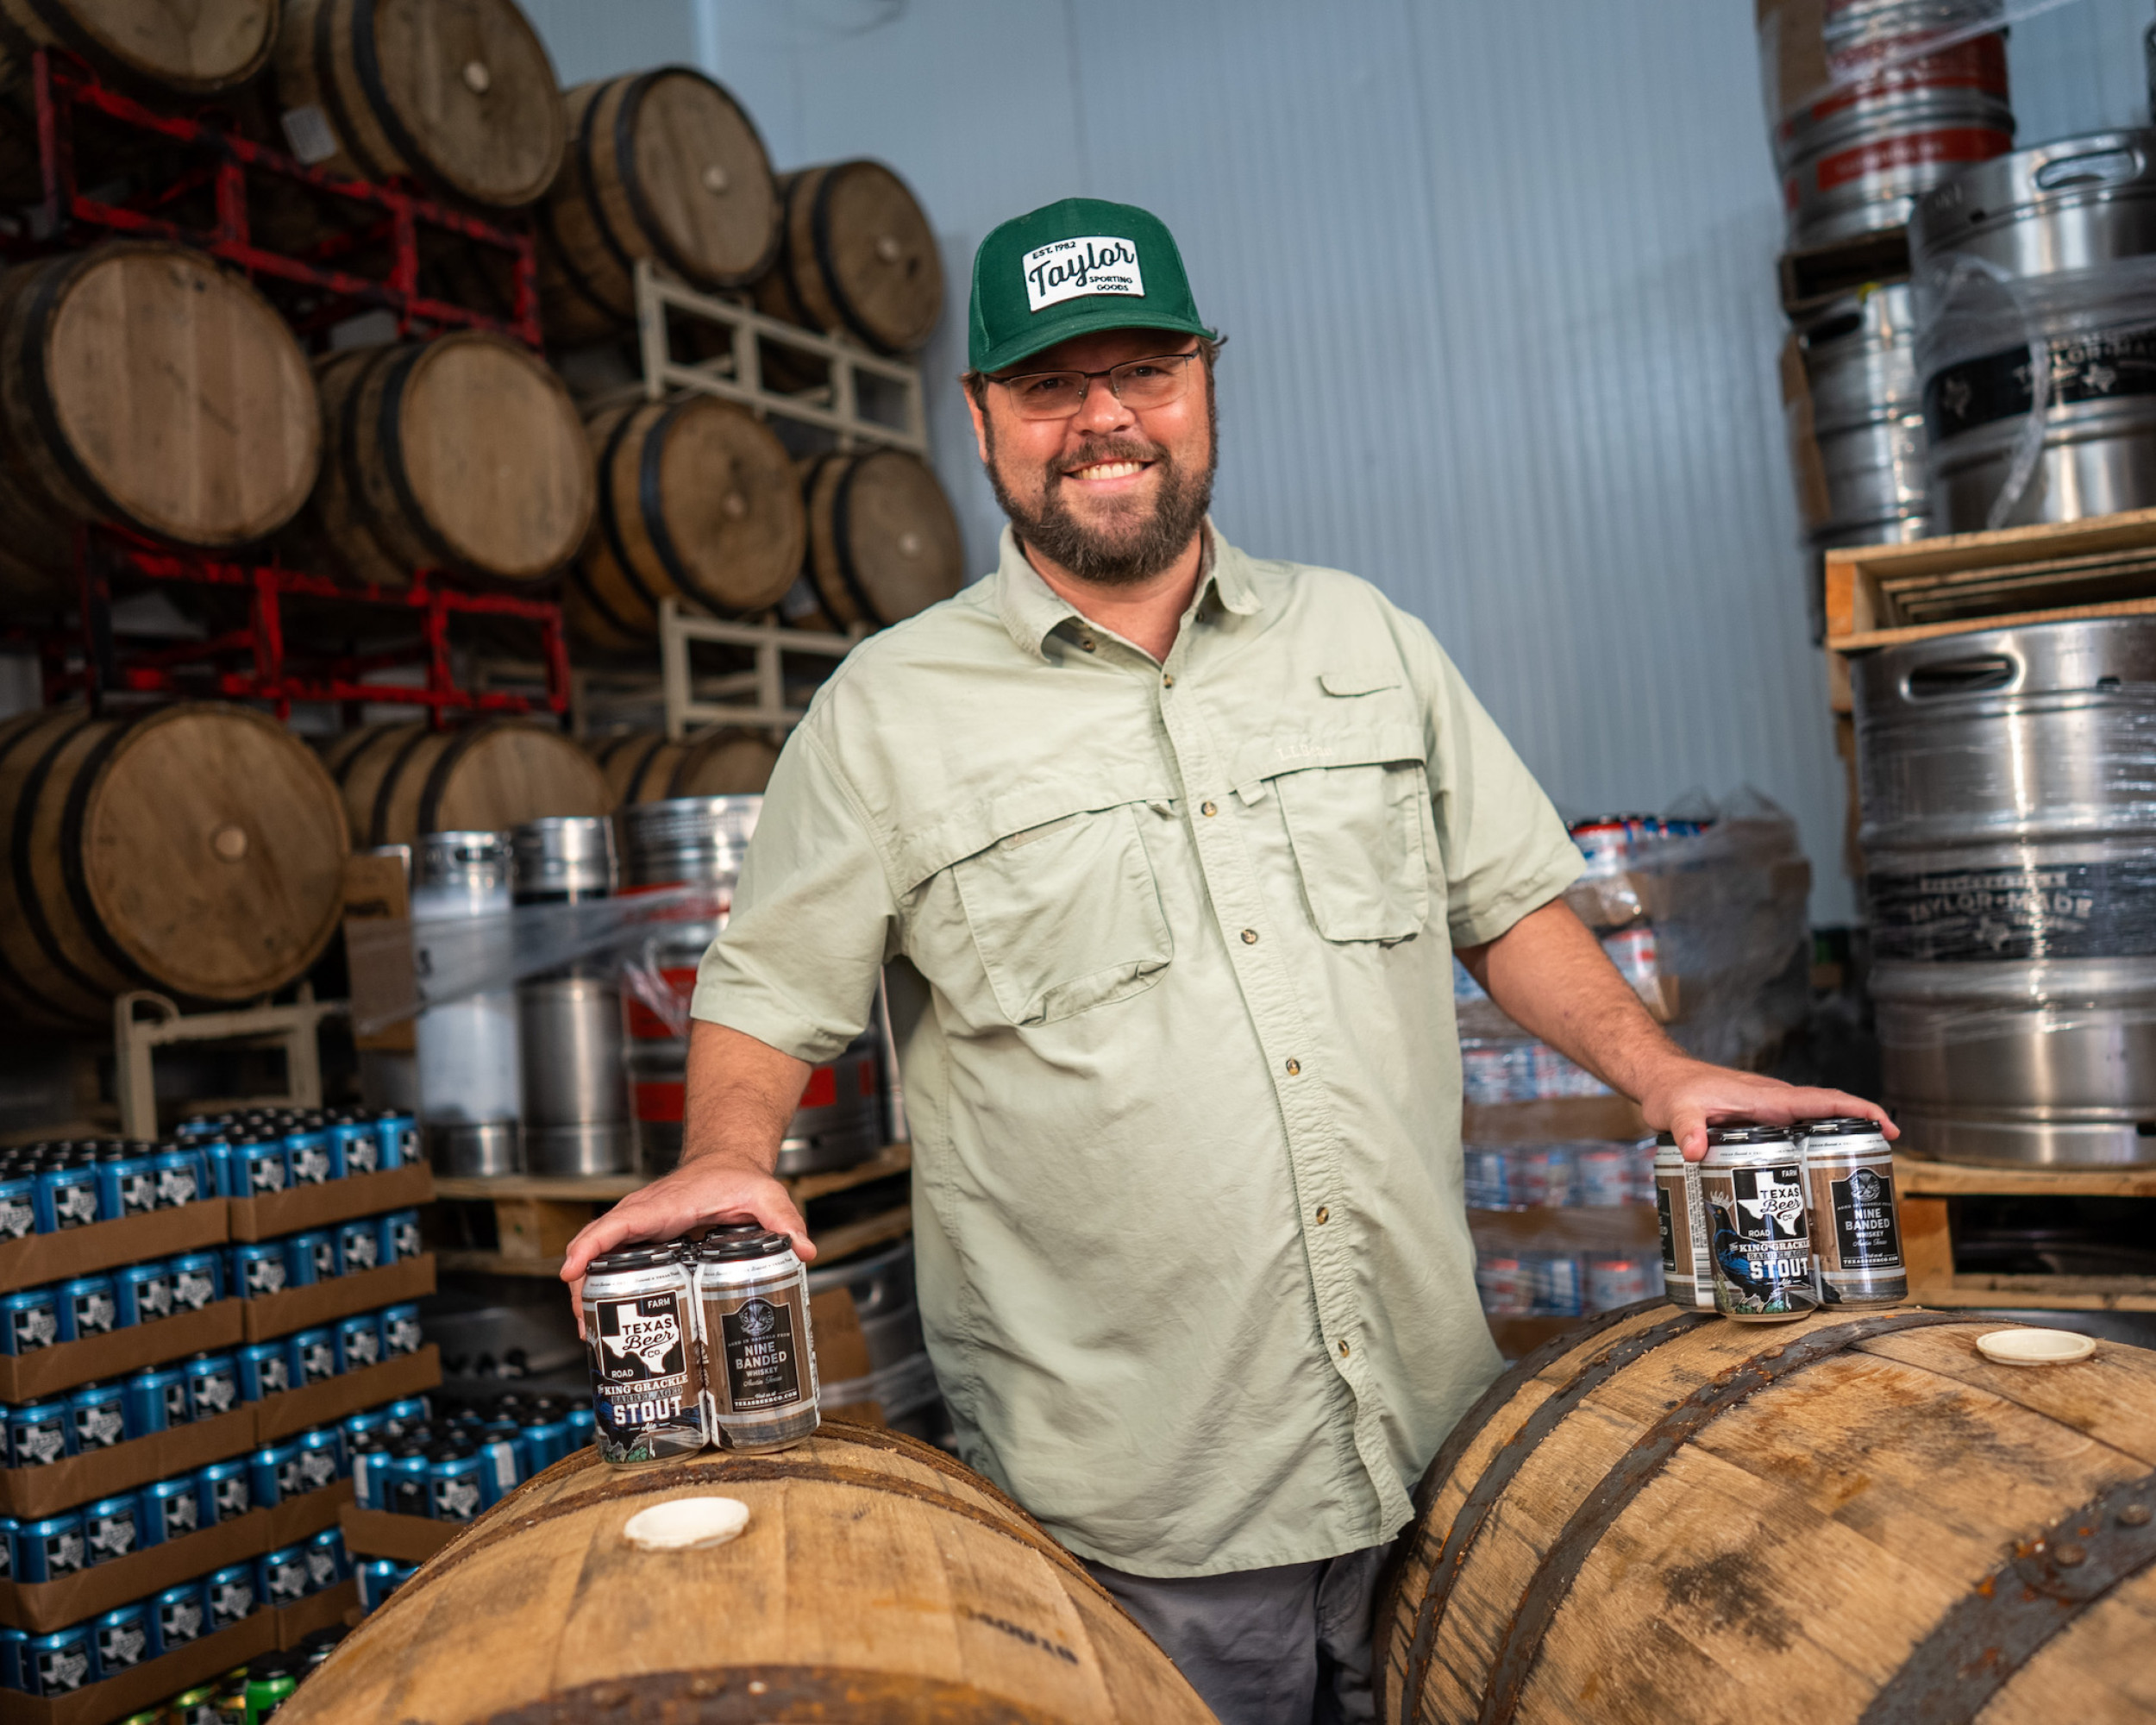 Taylor Beer co owner posing with some of his beer in front of some barrels